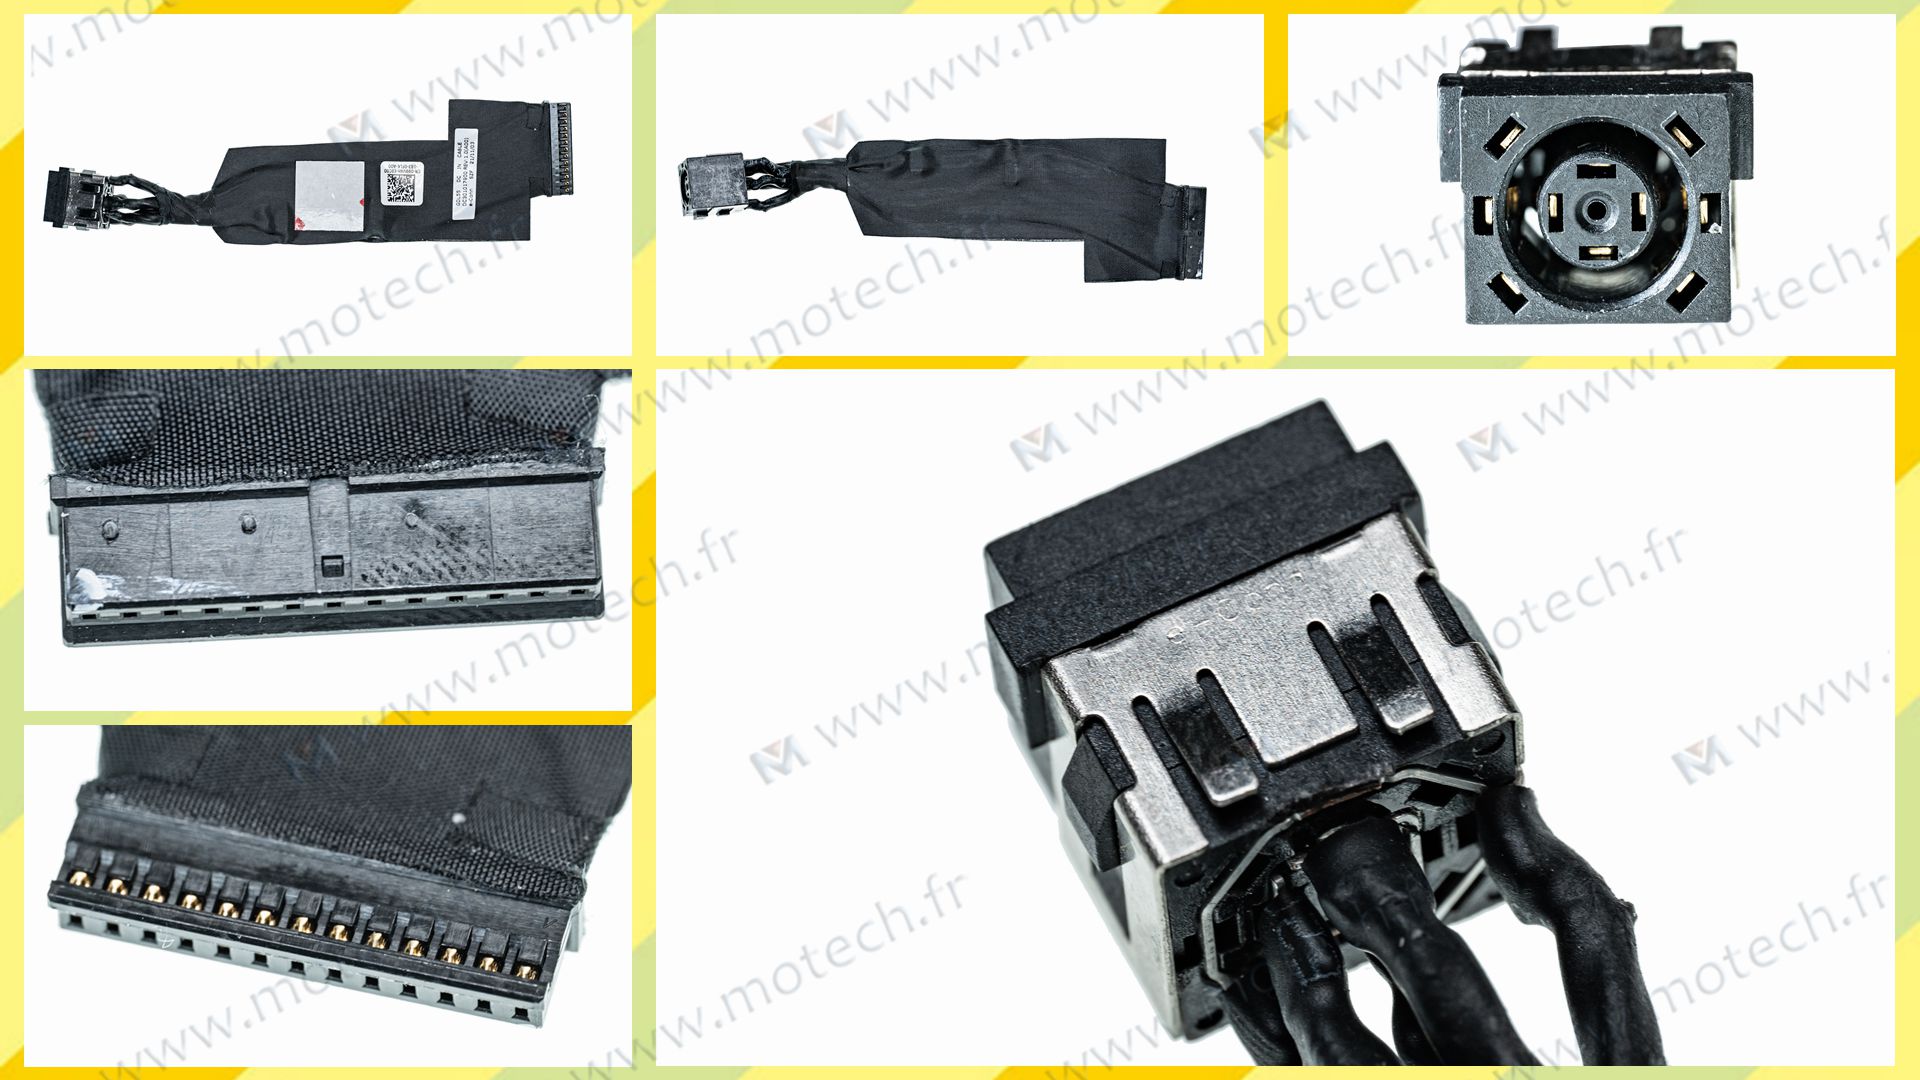 Dell G15 5510 DC Jack, DC IN Câble Dell G15 5510, Dell G15 5510 Jack alimentation, Dell G15 5510 Power Jack, Dell G15 5510 Prise Connecteur, Dell G15 5510 Connecteur alimentation, Dell G15 5510 connecteur de charge, 